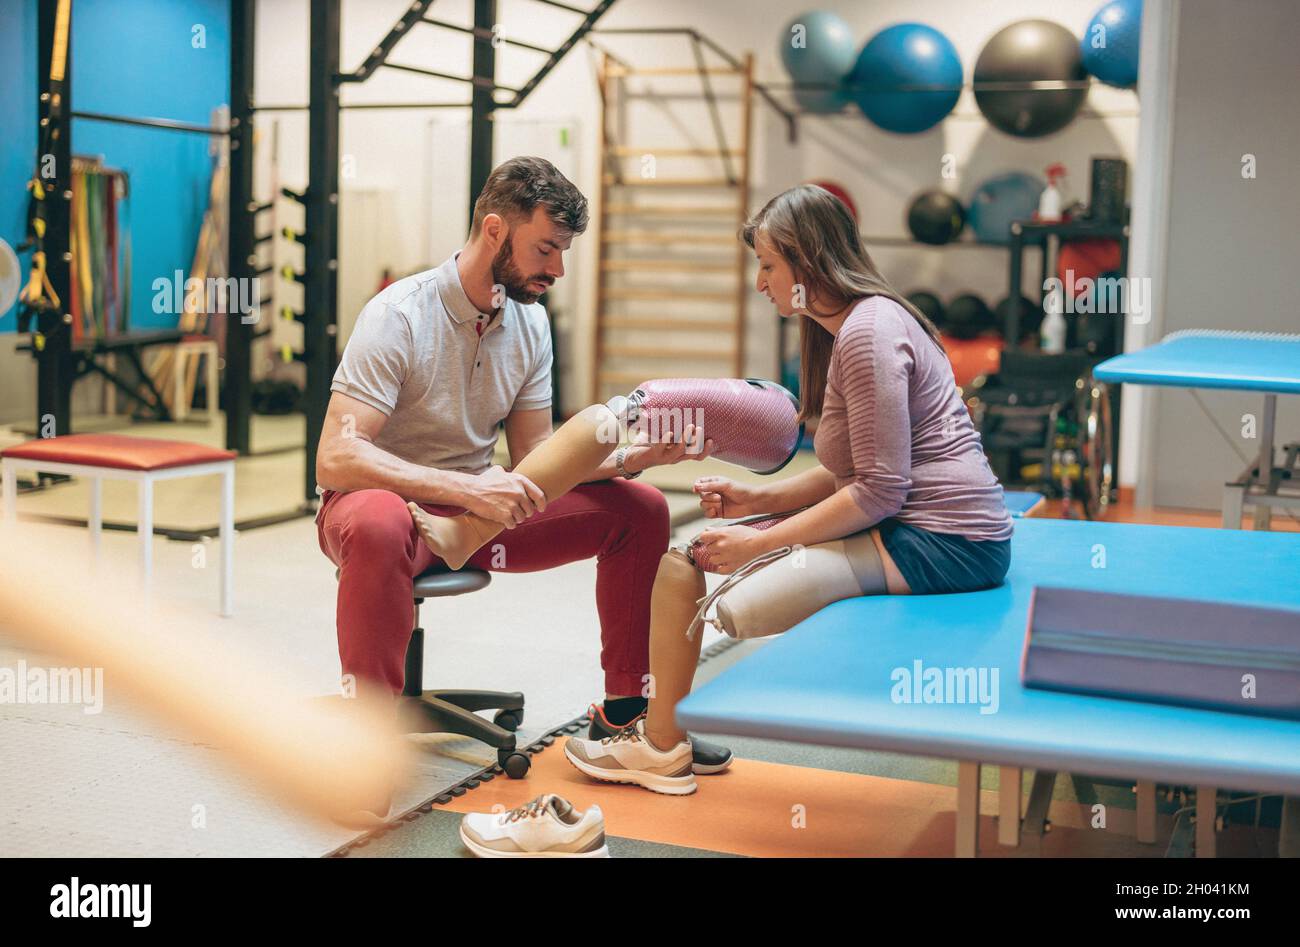 Physiotherapist helping young woman with prosthetic legs Stock Photo